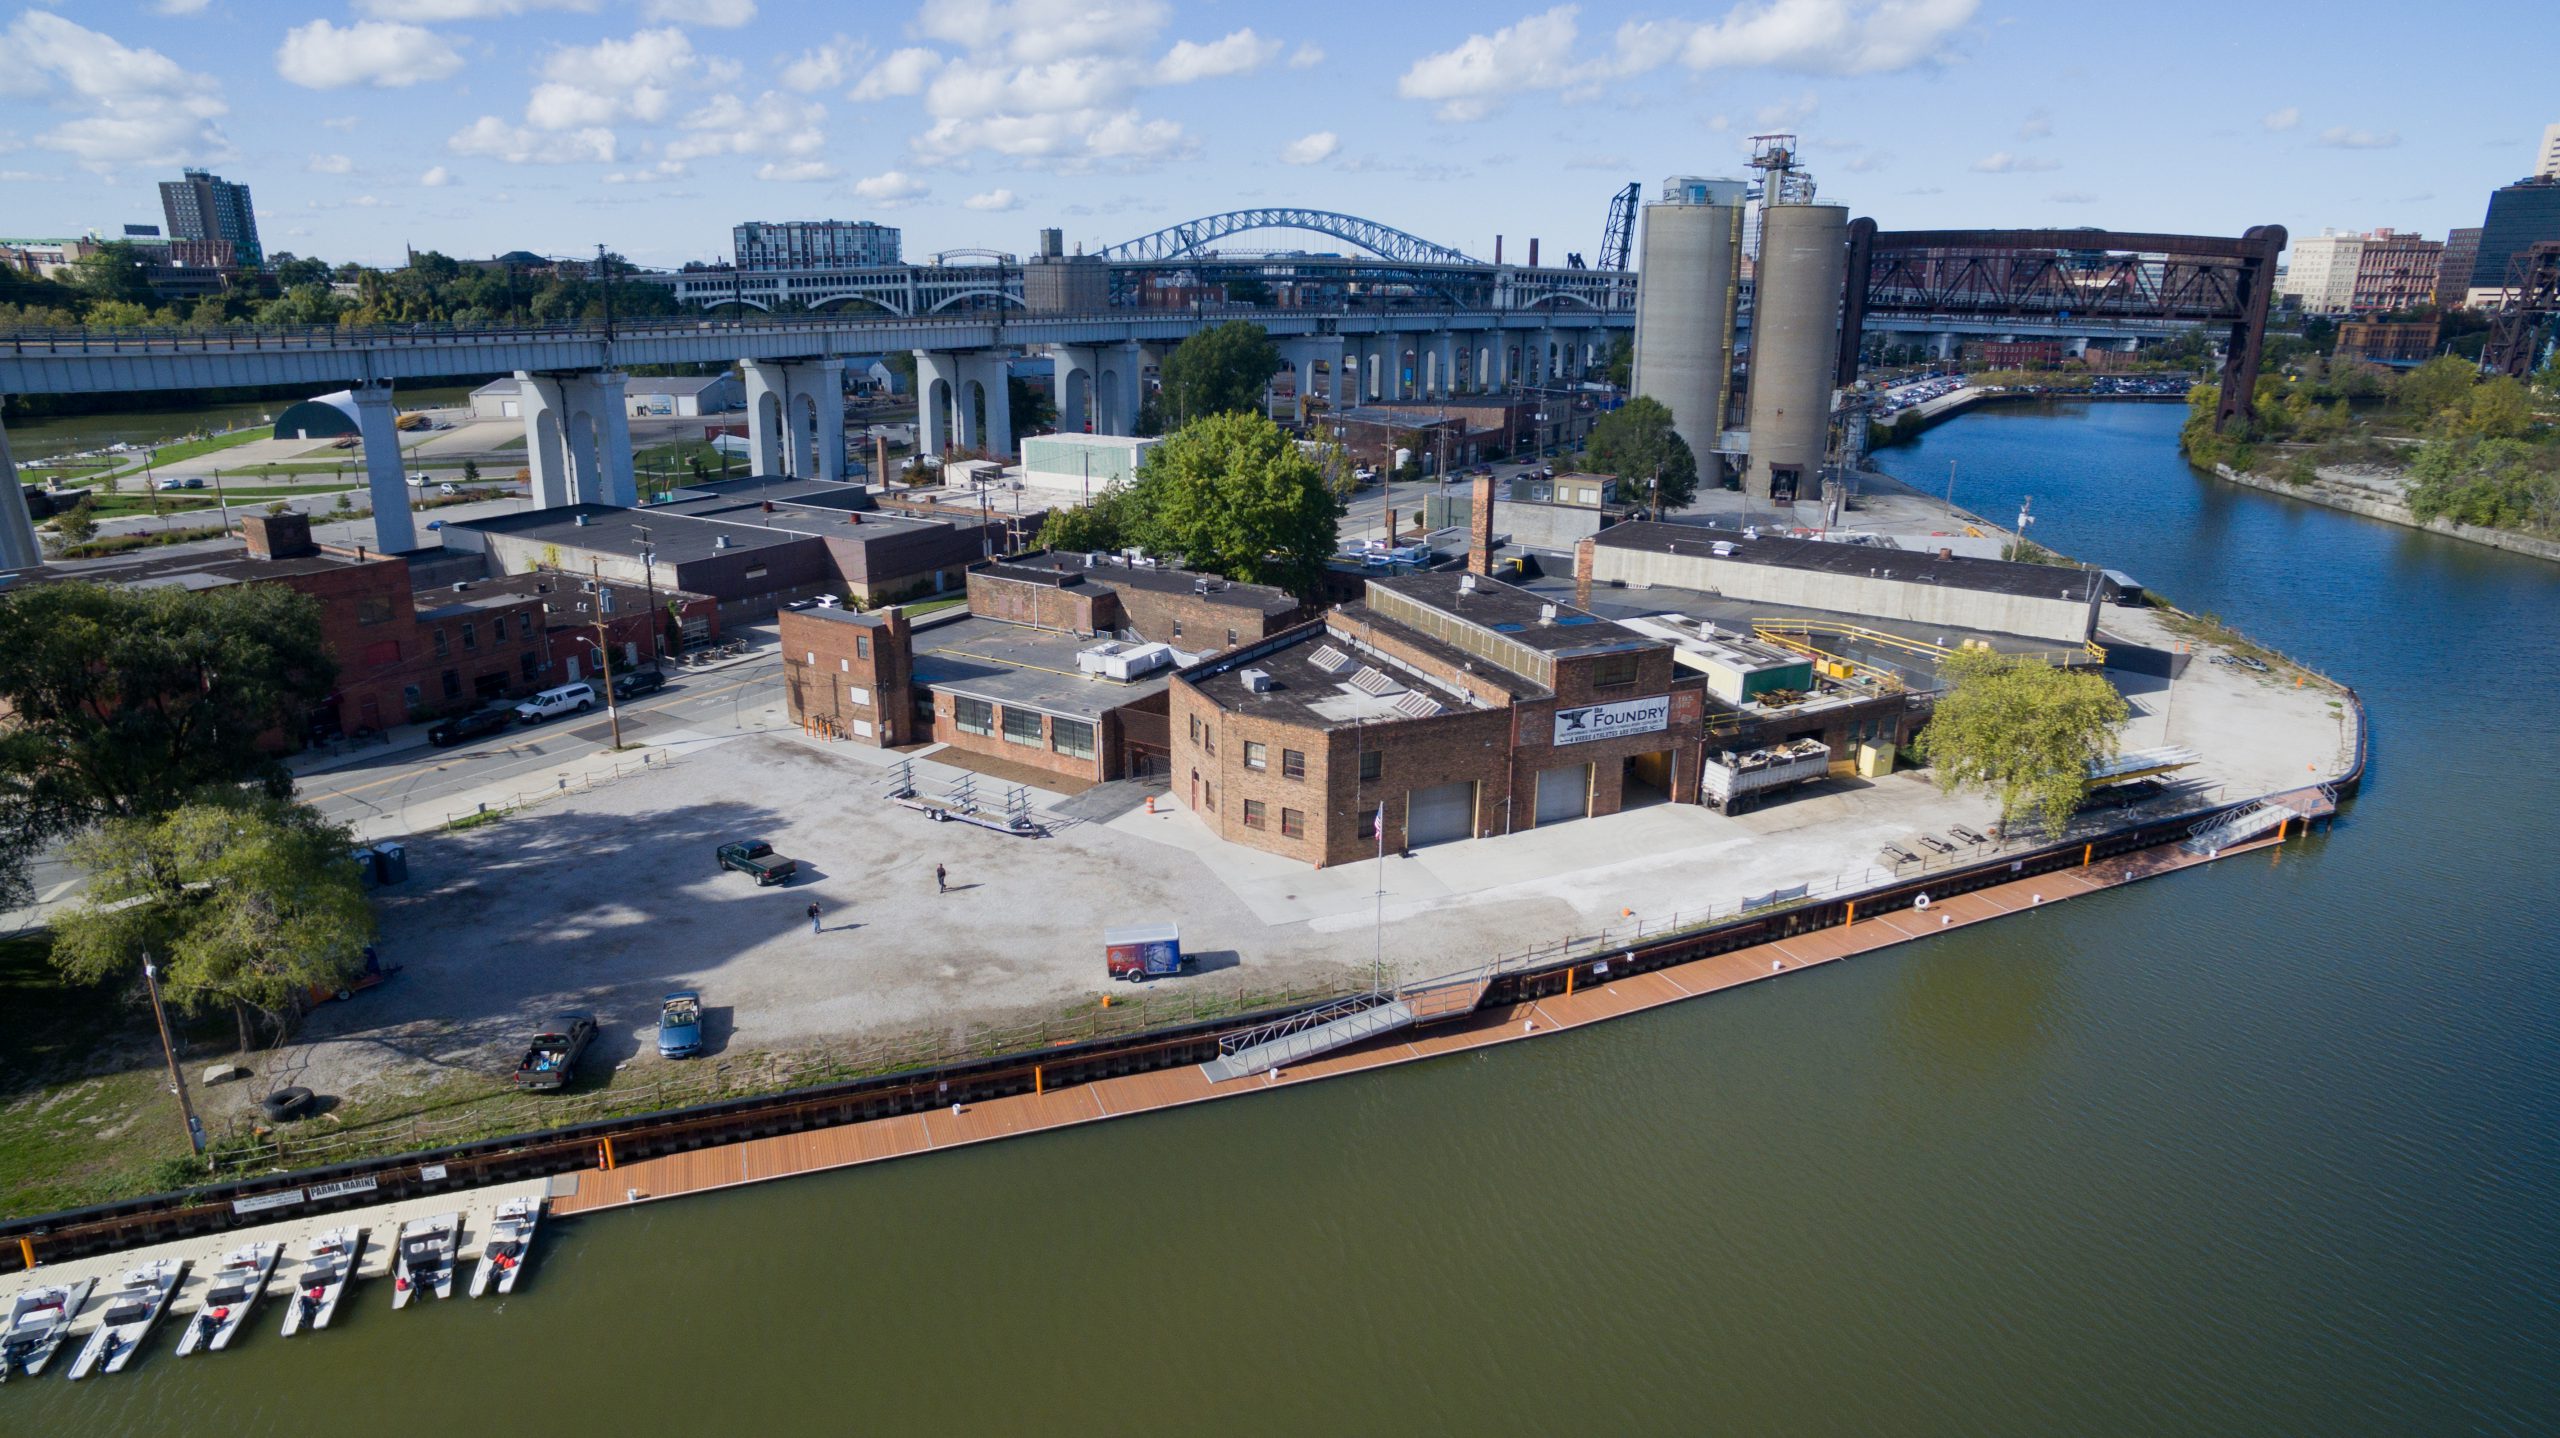 The Foundry Rowing & Sailing Center